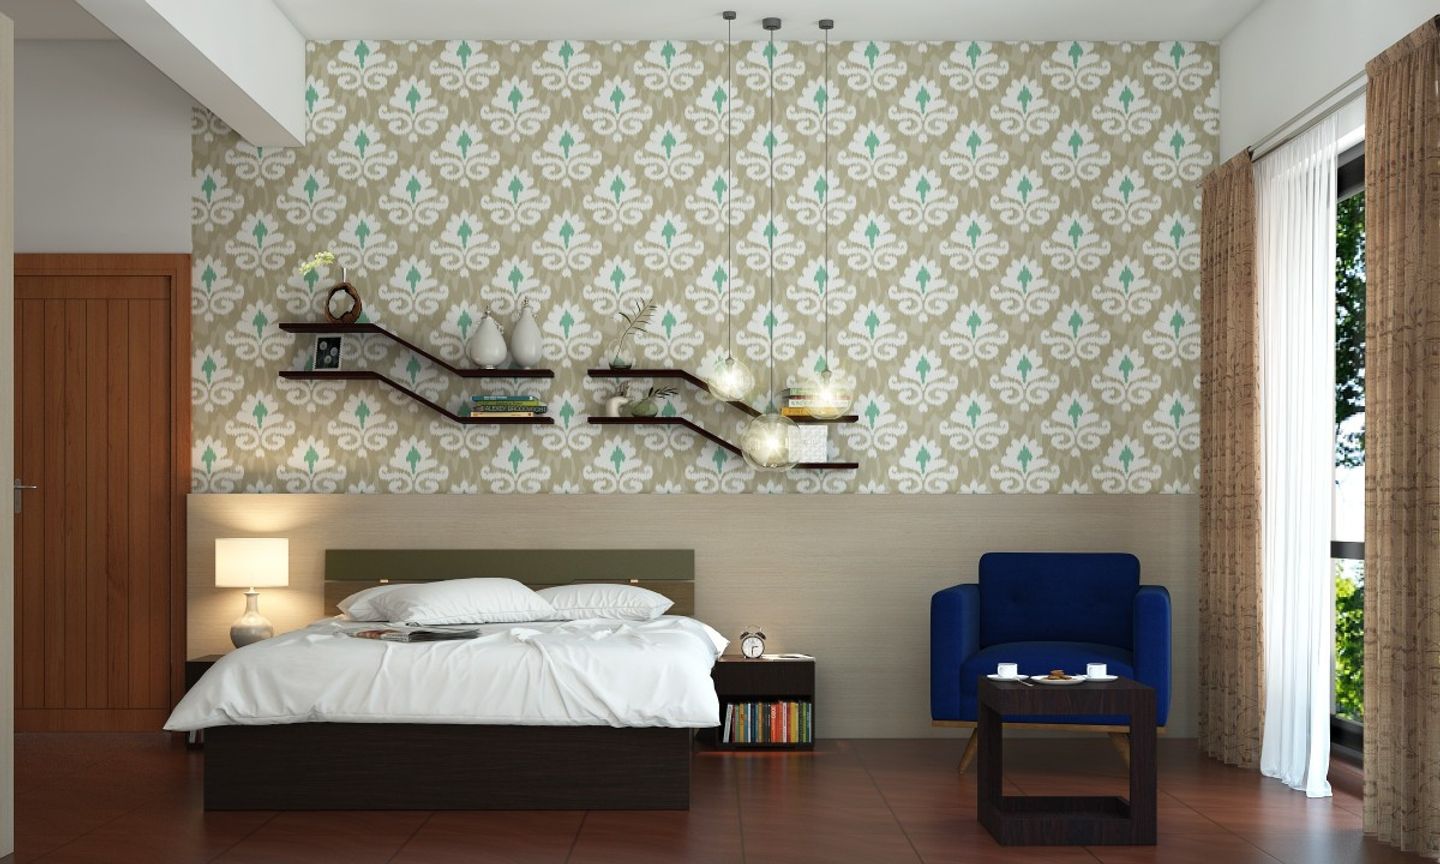 Modern Master Bedroom Design With Wall Shelves And Wallpaper